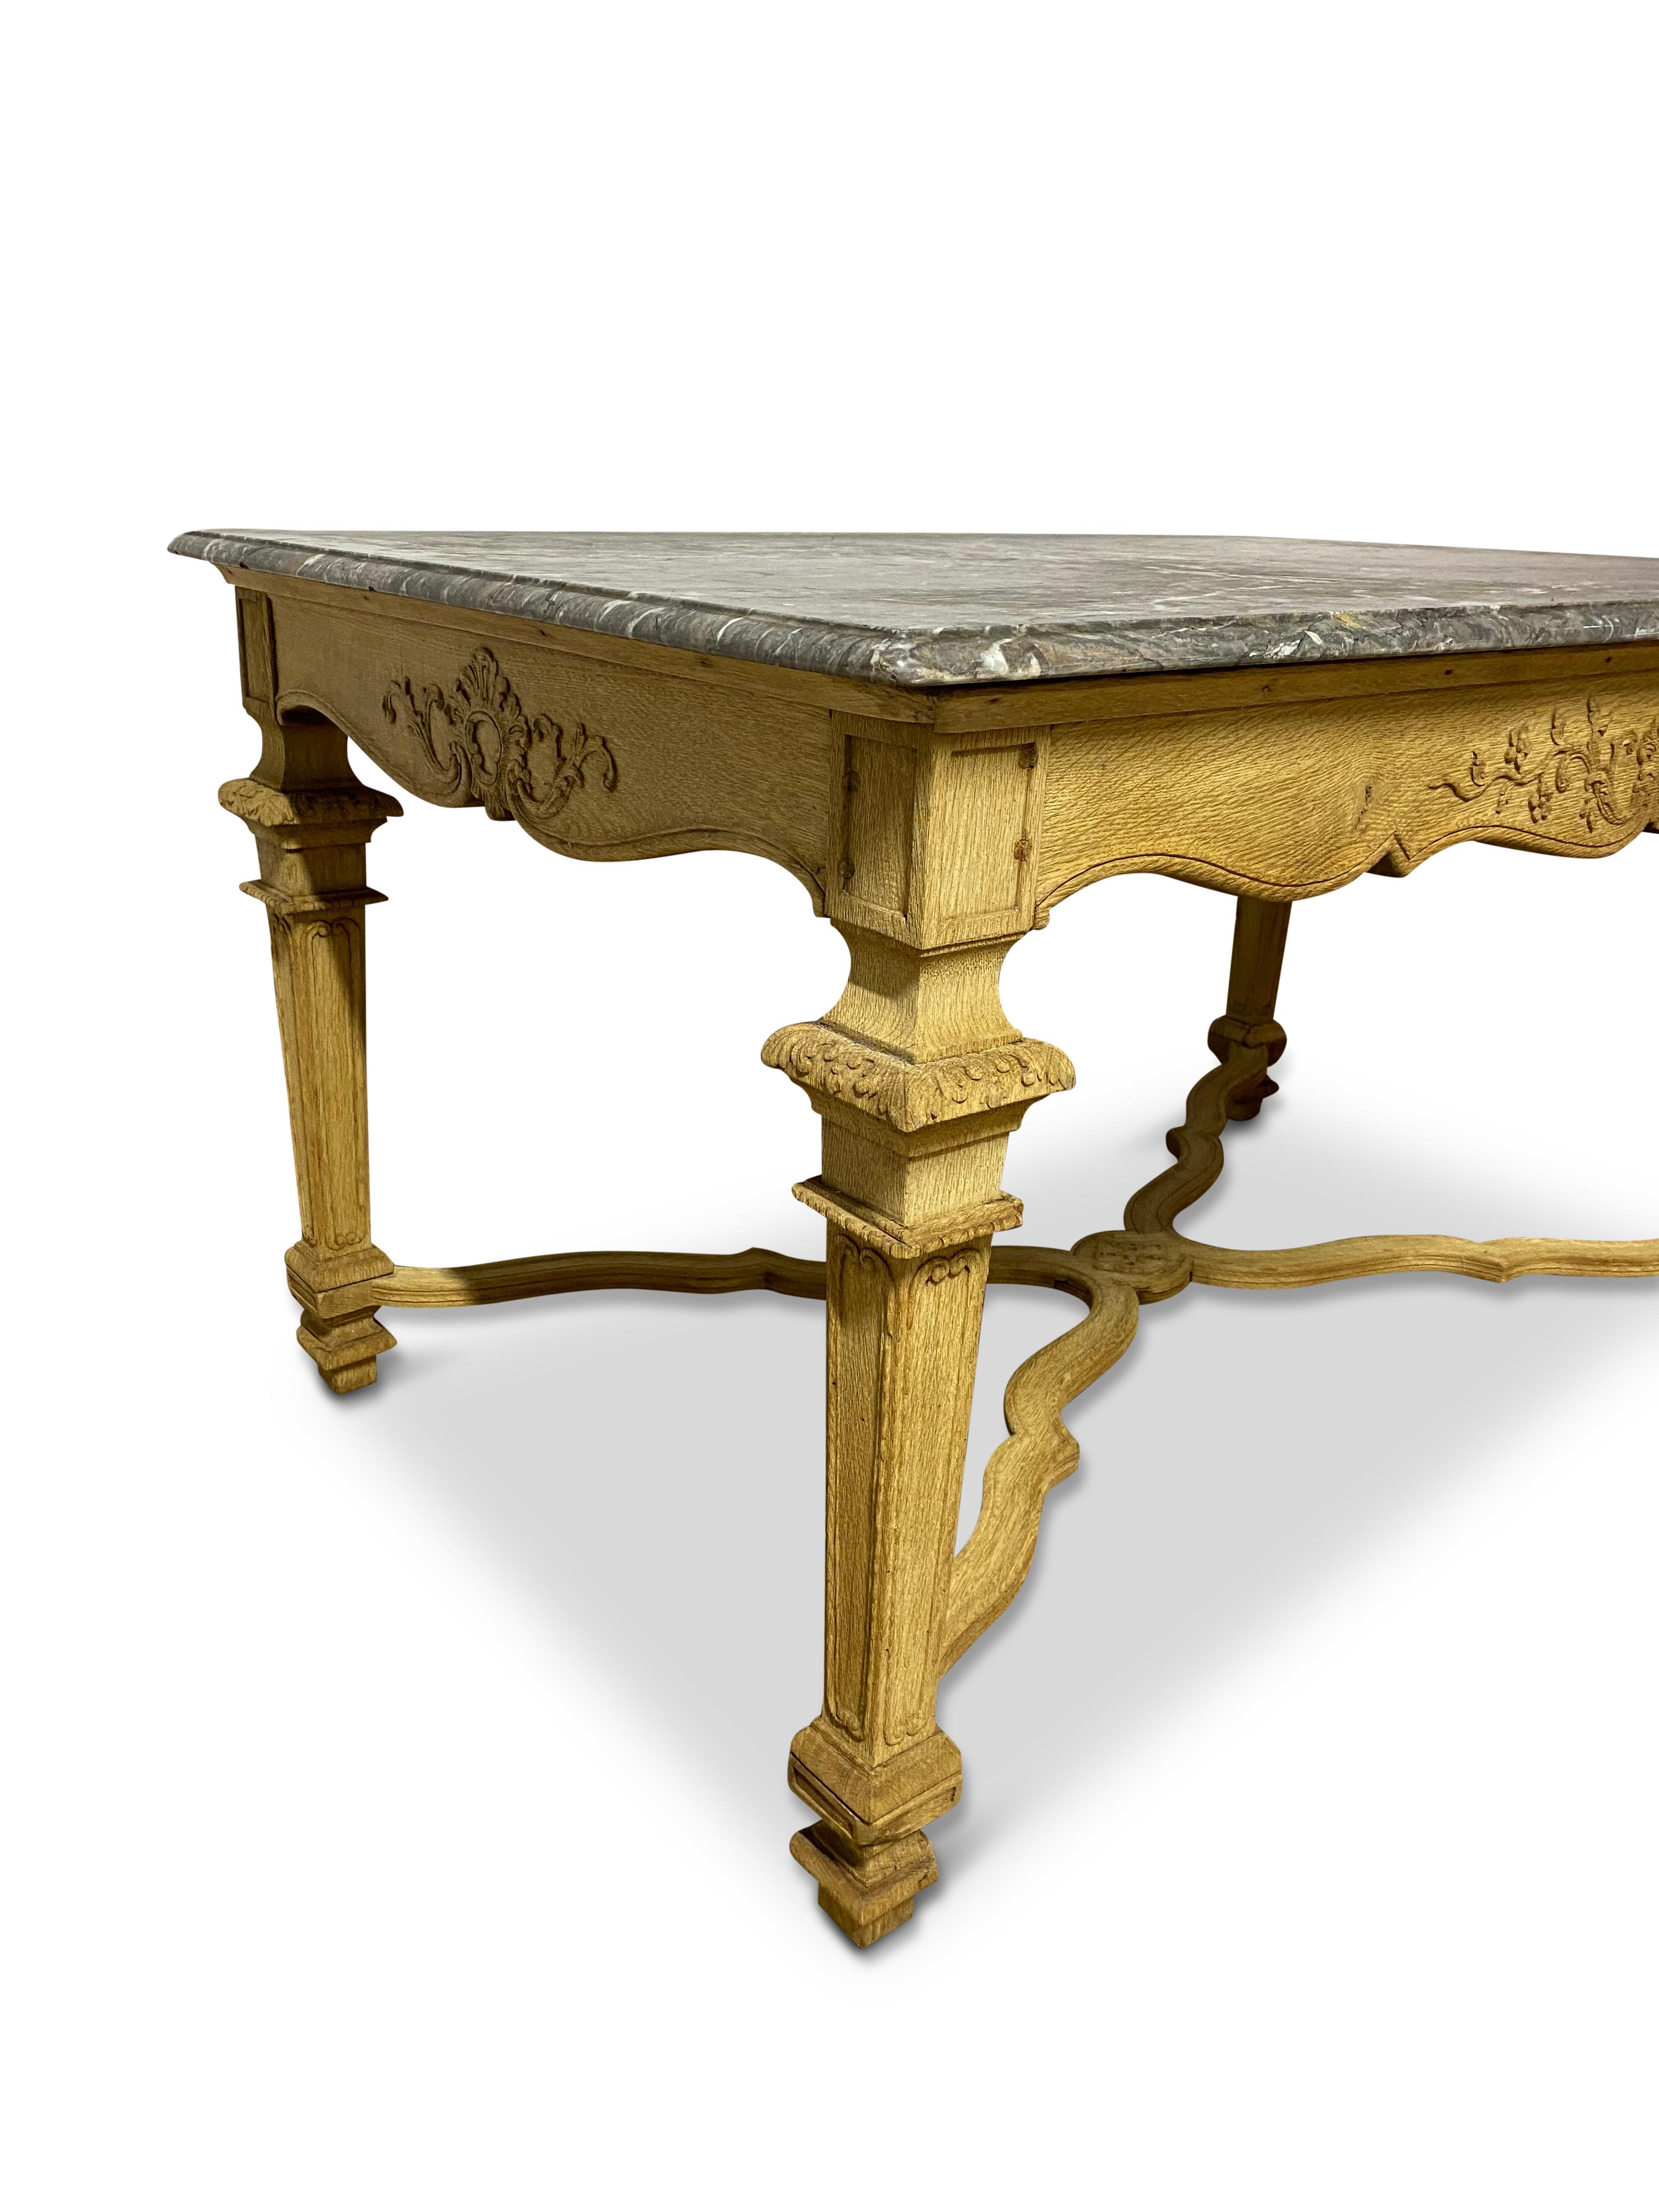 18th Century French Provincial Center Table with Original Breccia Marble Top For Sale